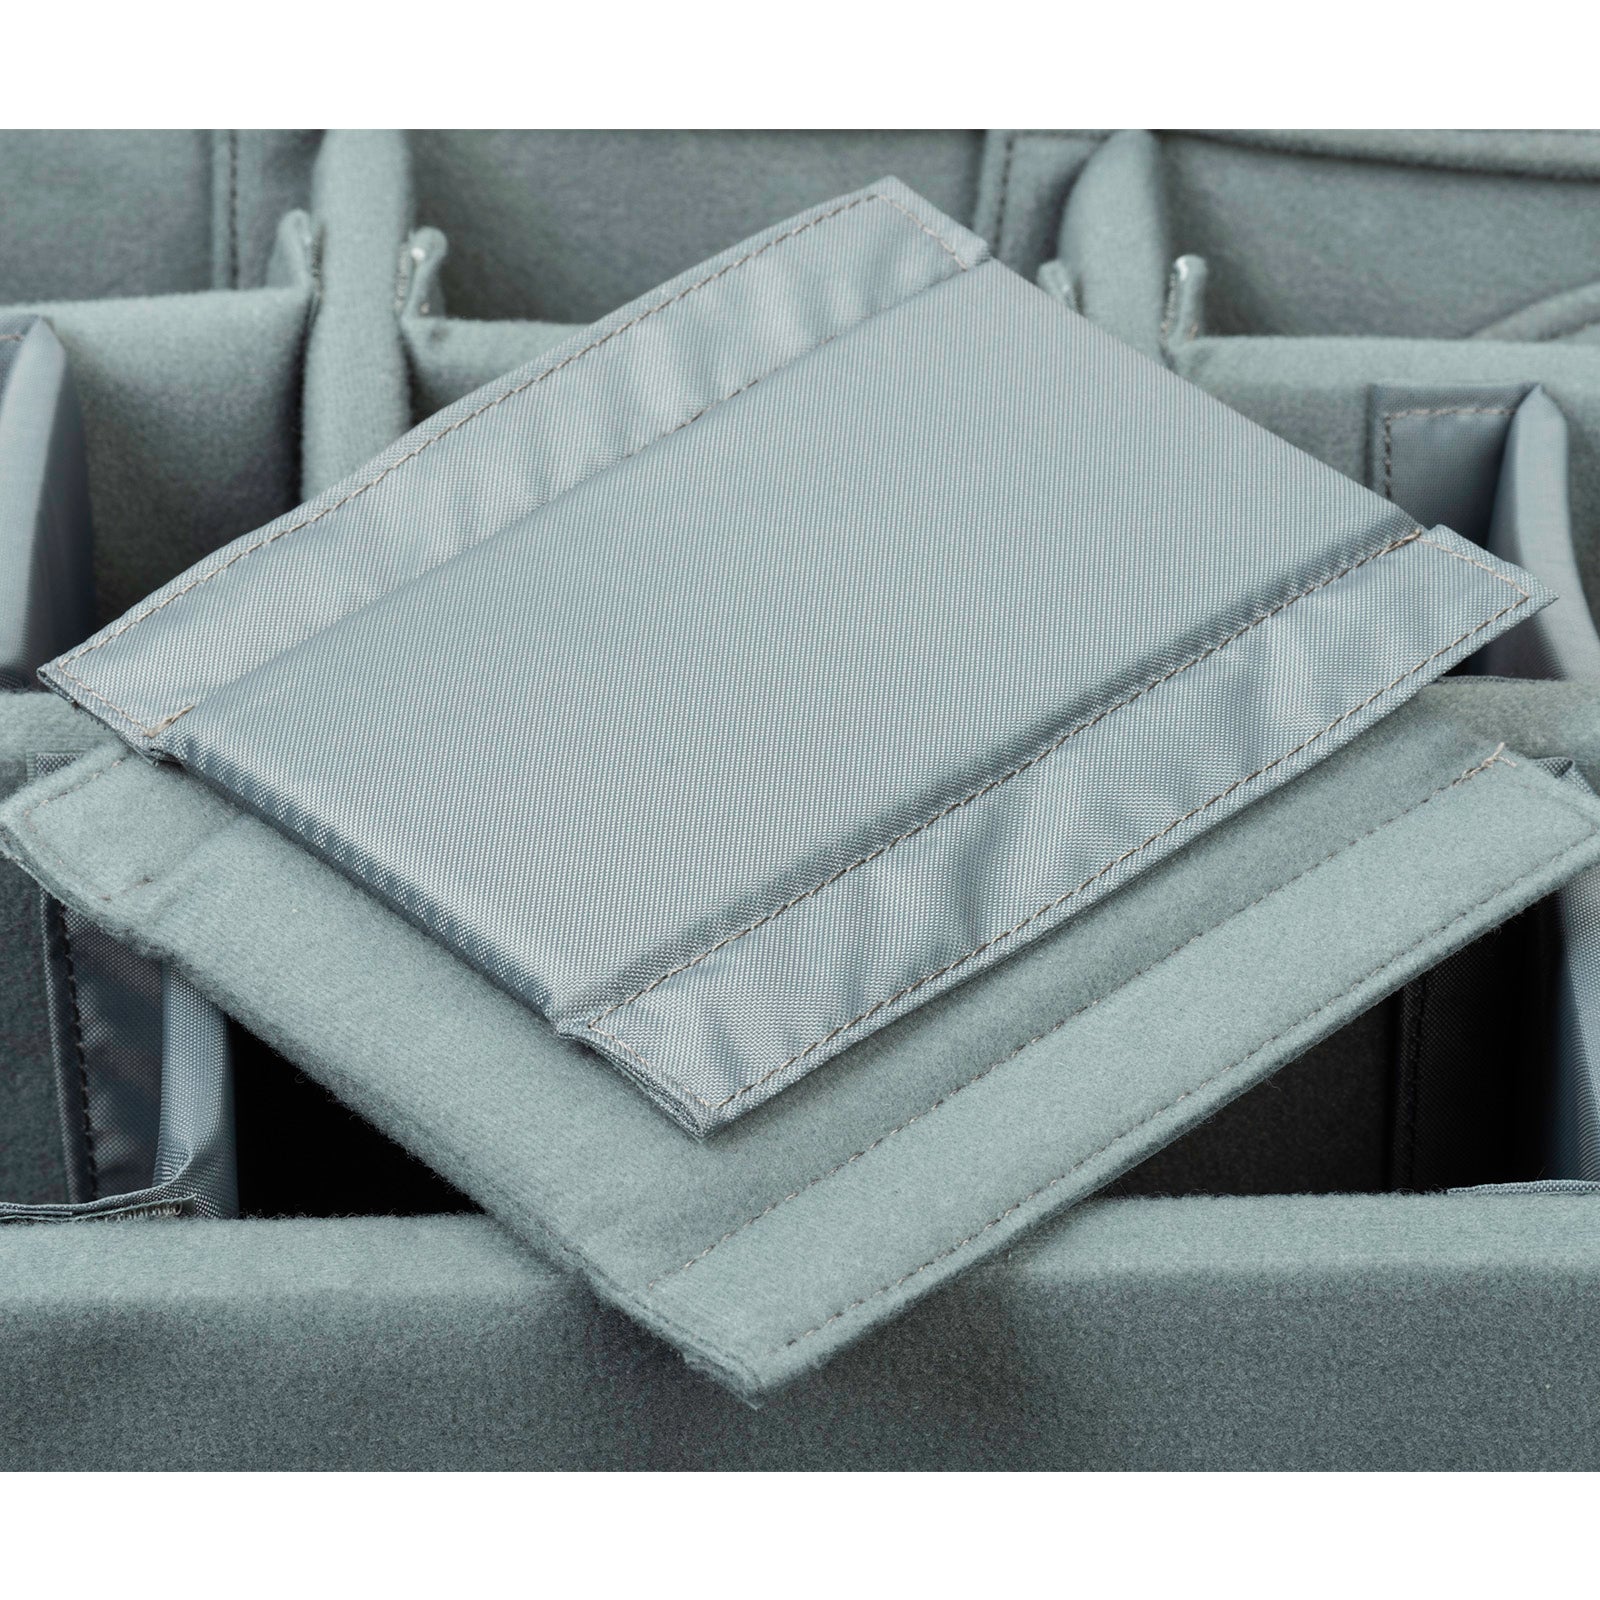 Closed-cell foam dividers support heavy gear and maintain strength over time